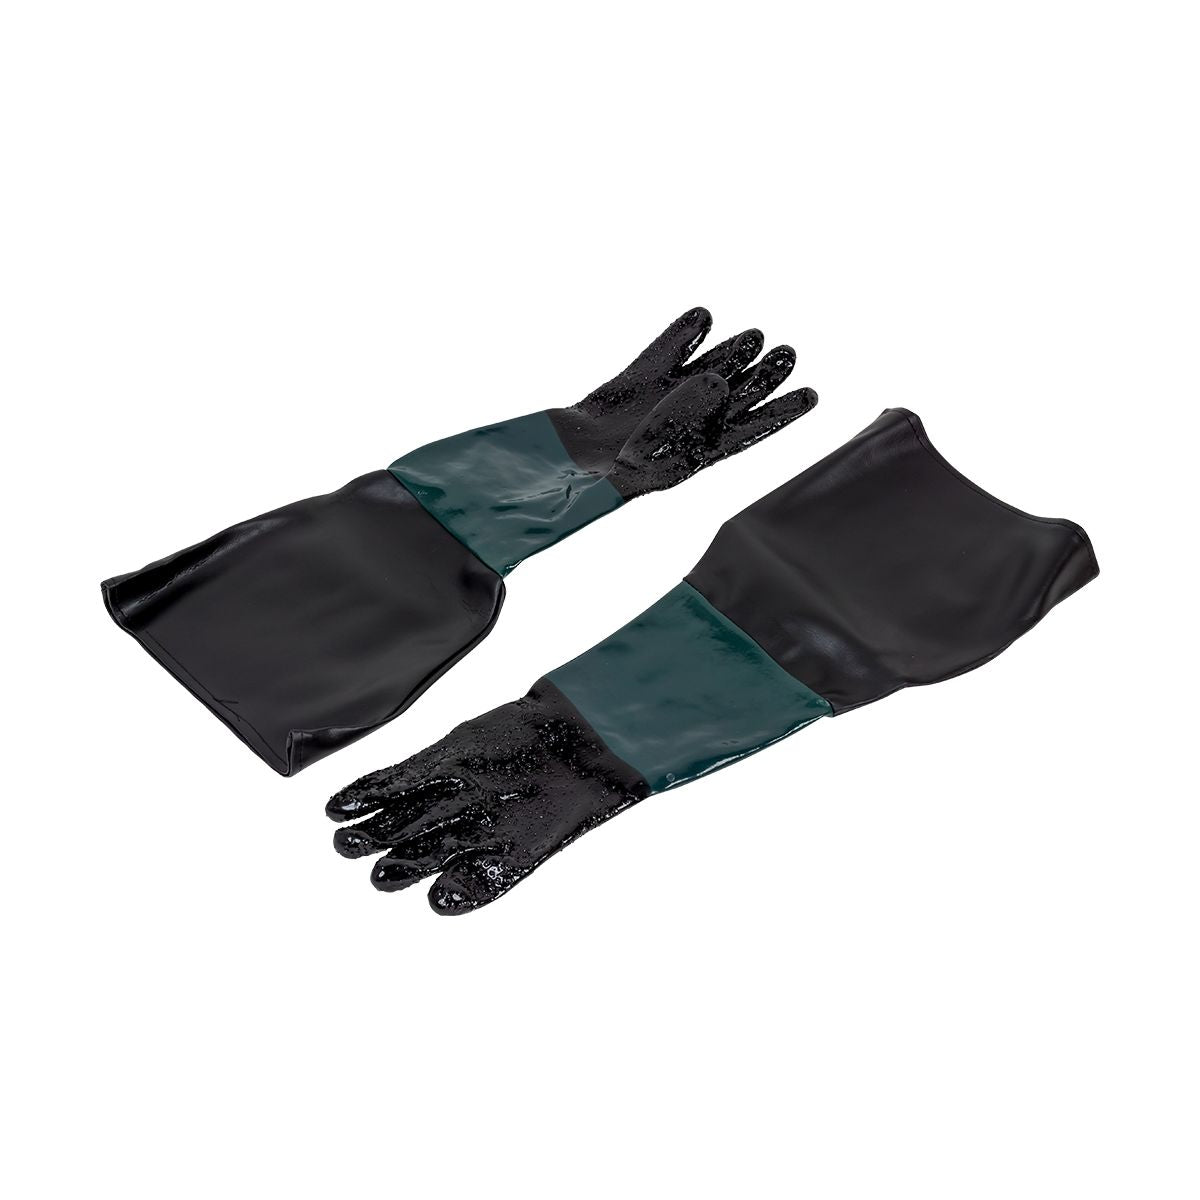 Replacement Glove For Sandblaster Cabinets